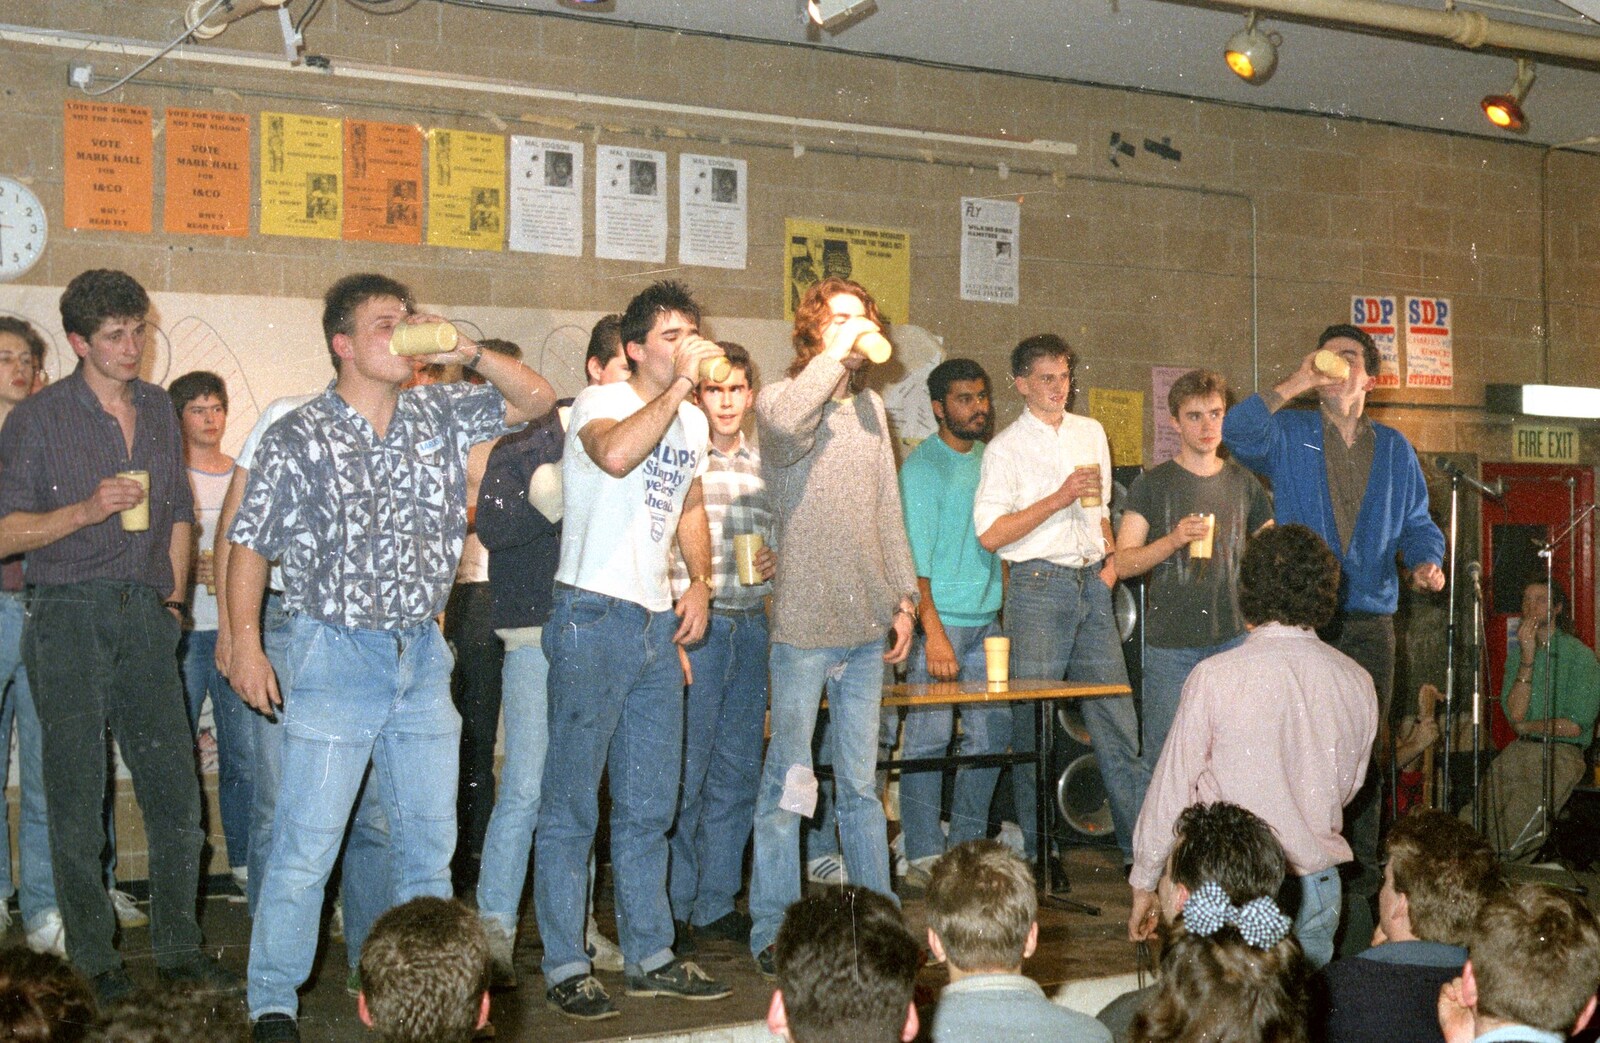 The custard boat race commences from Uni: The Pirate RAG Review, PPSU Students' Union, Plymouth - 11th February 1987